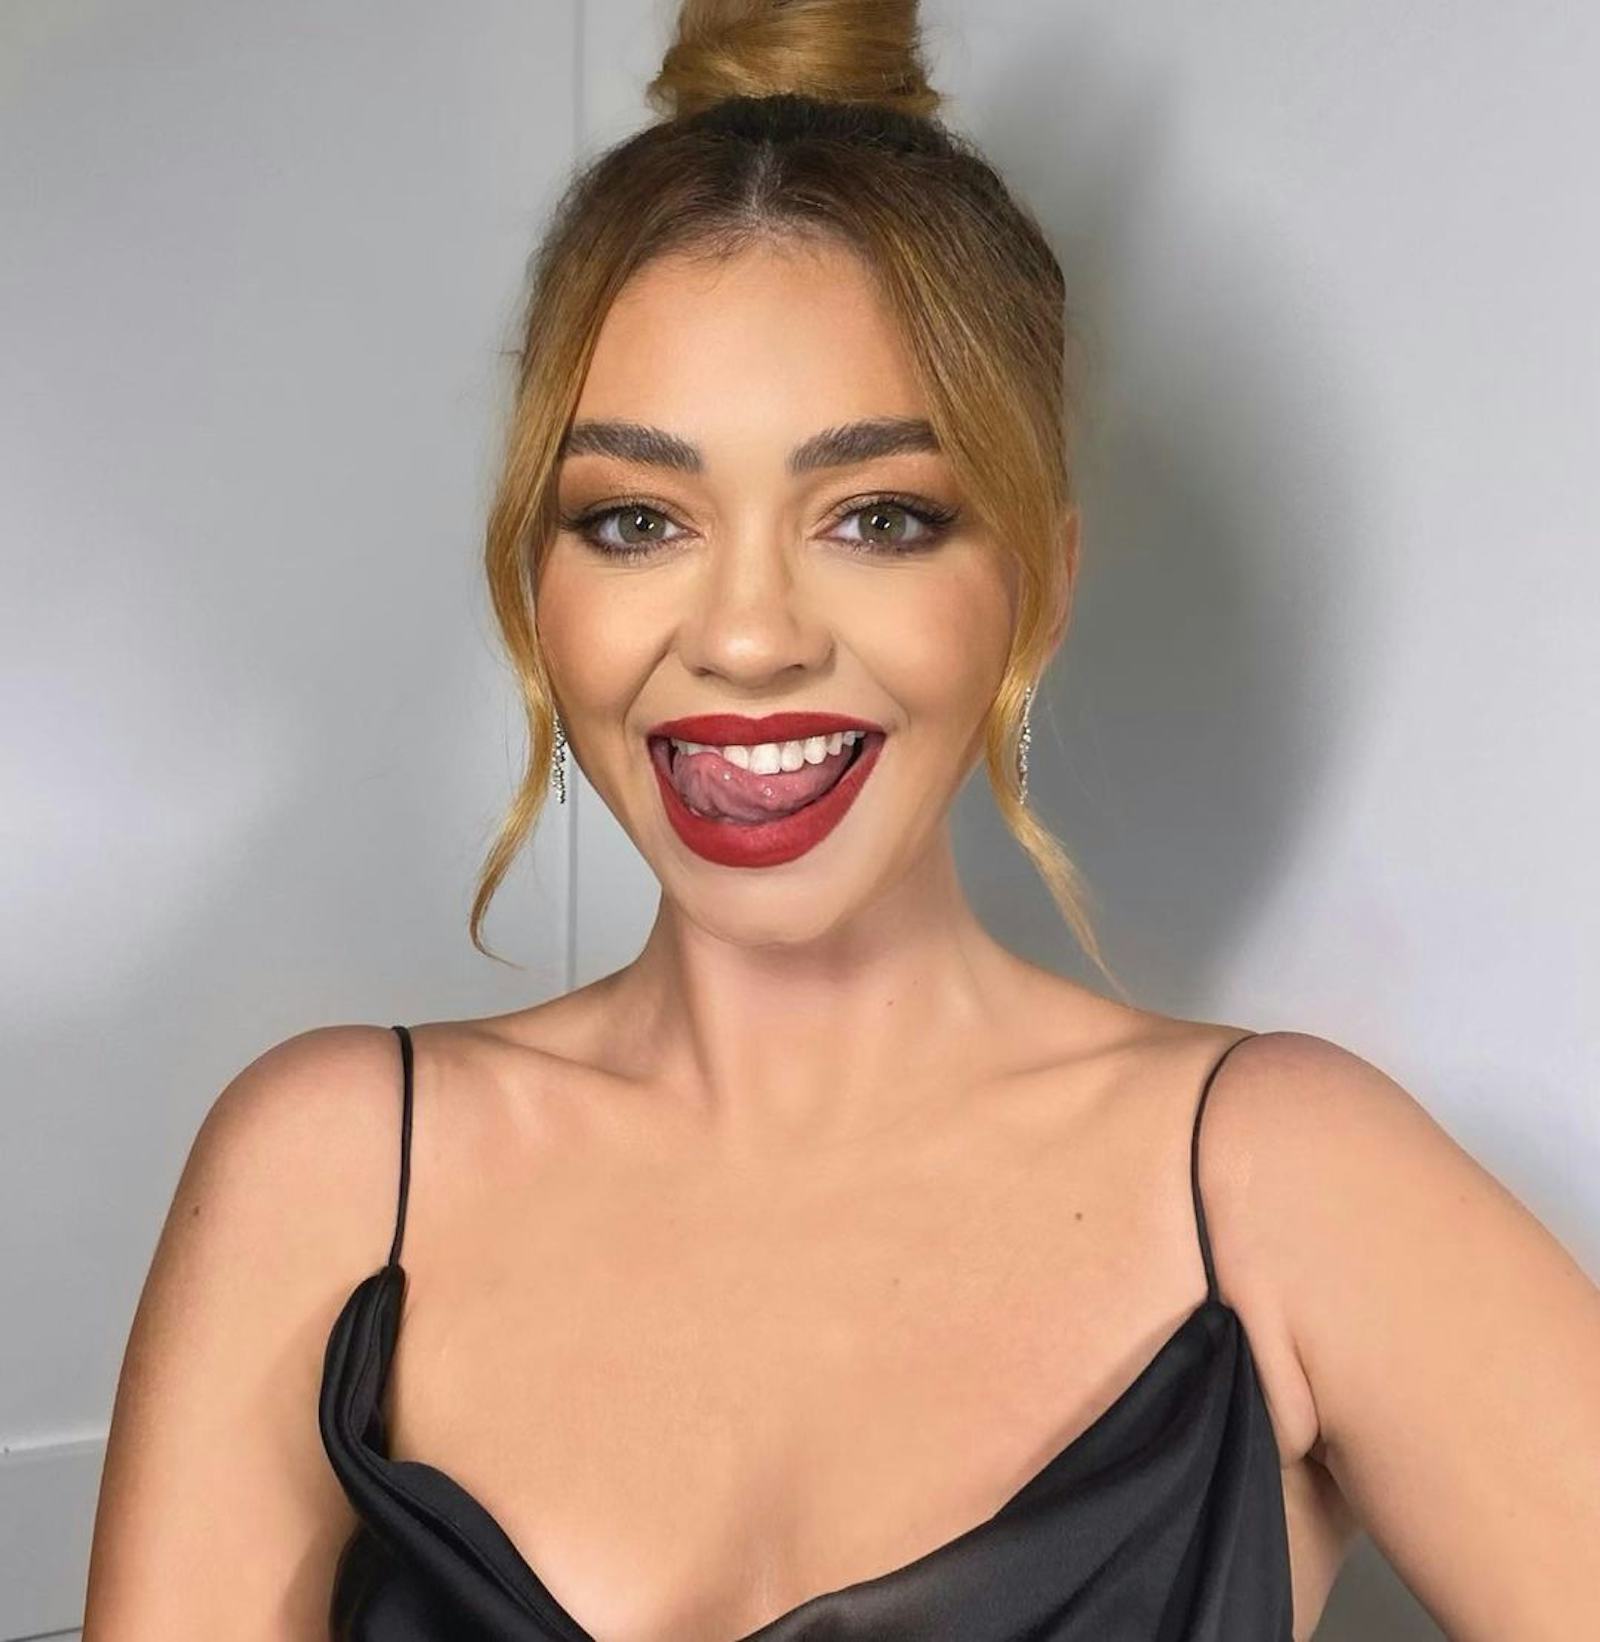 Sarah Hyland Just Chopped Her Hair & She Looks So Different